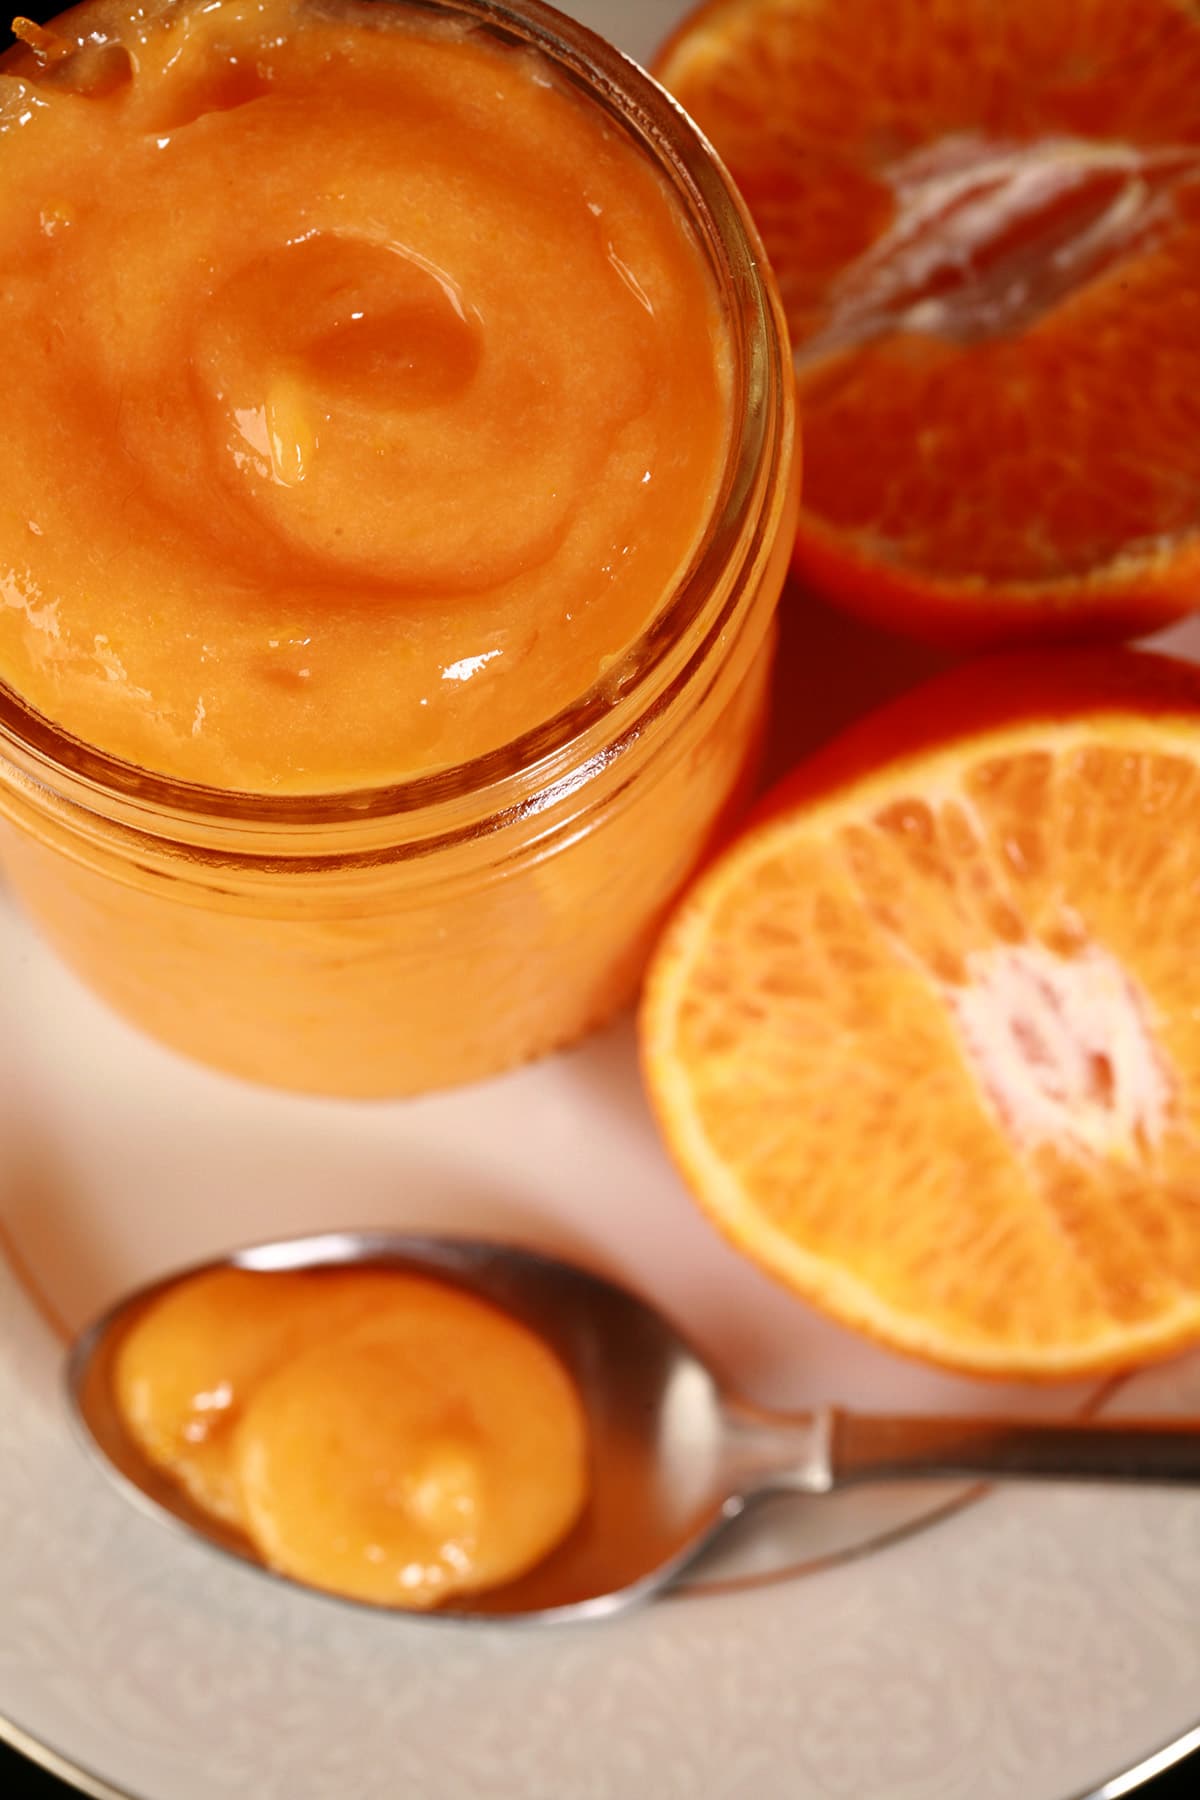 A jar of orange curd on a plate, along with a spoon of curd and a sliced orange.